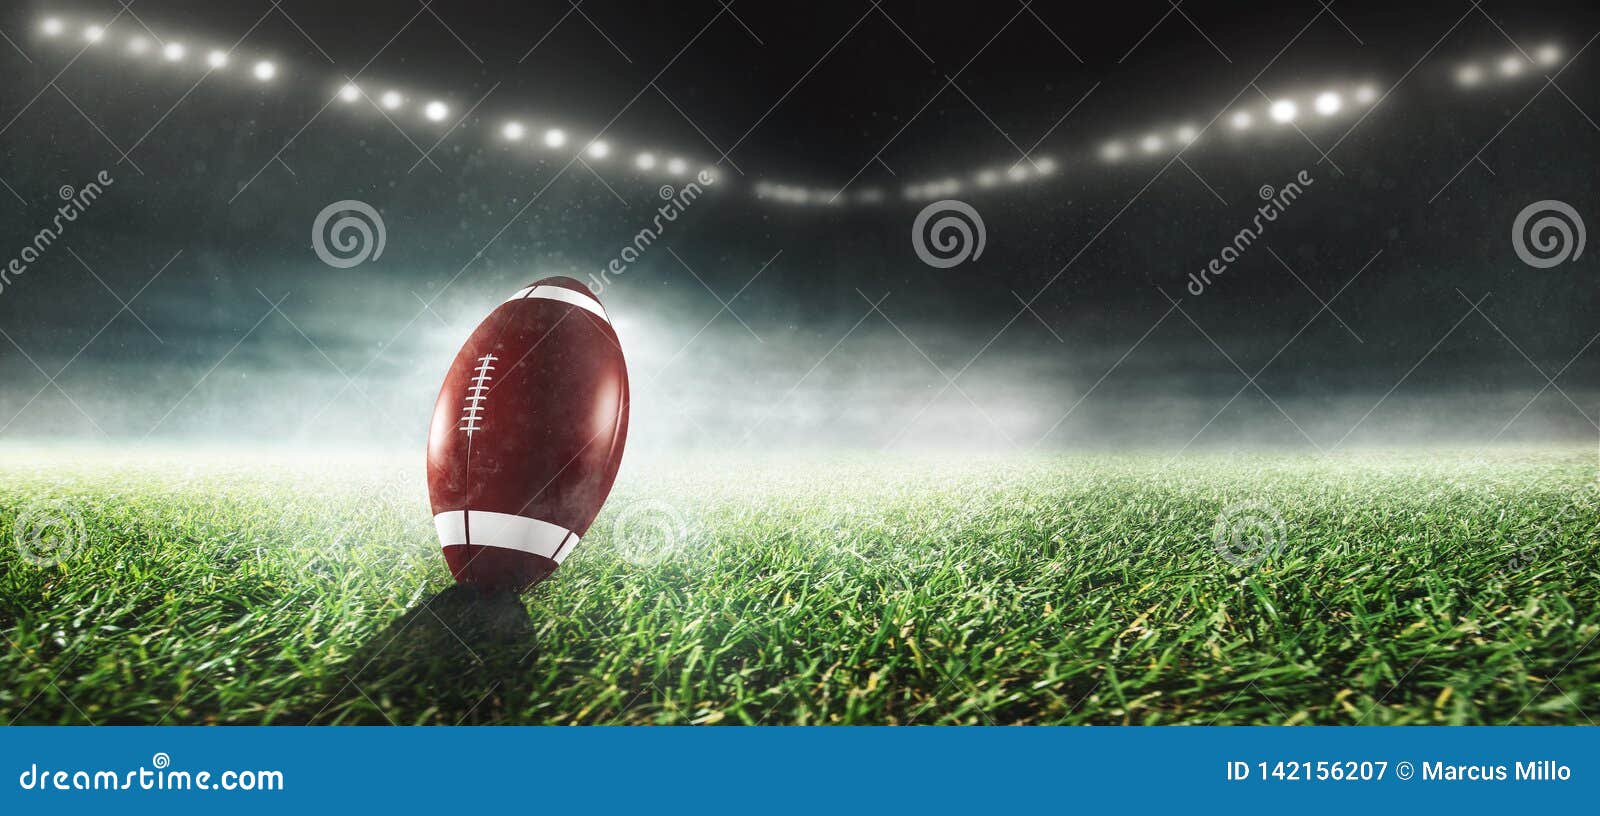 American Football is on Stadium Stock Image - Image of soccer, green